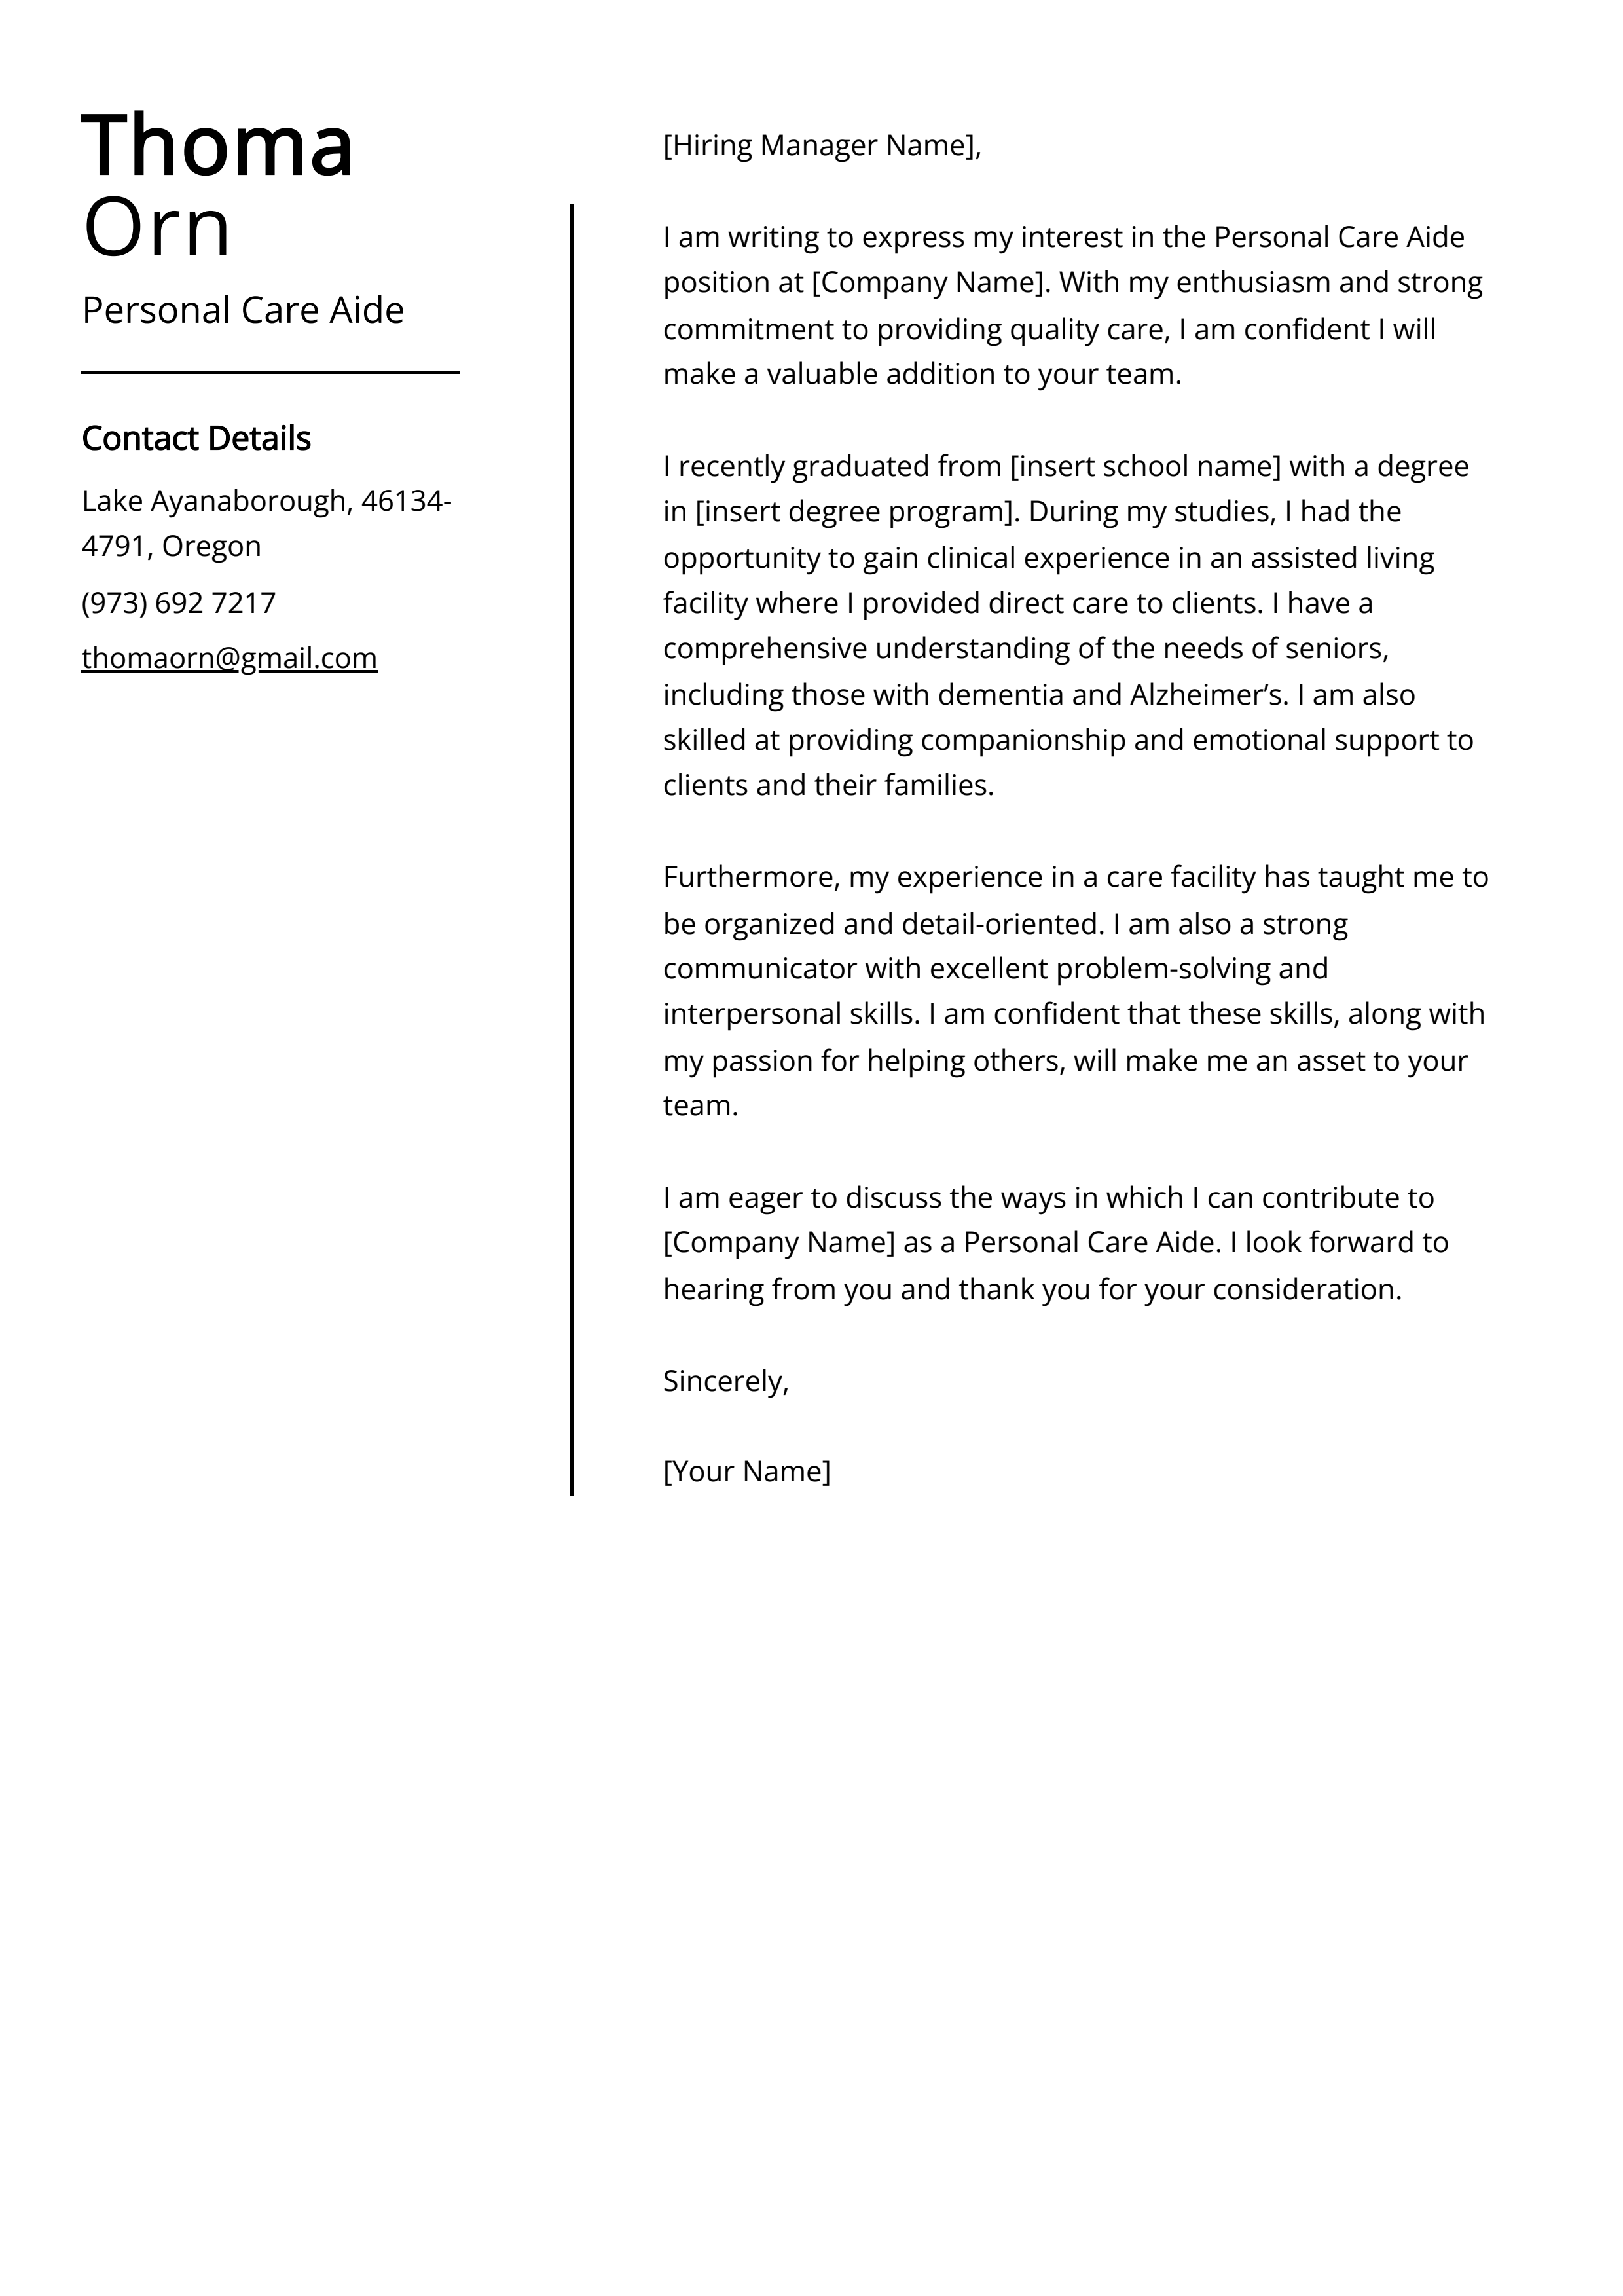 Personal Care Aide Cover Letter Example